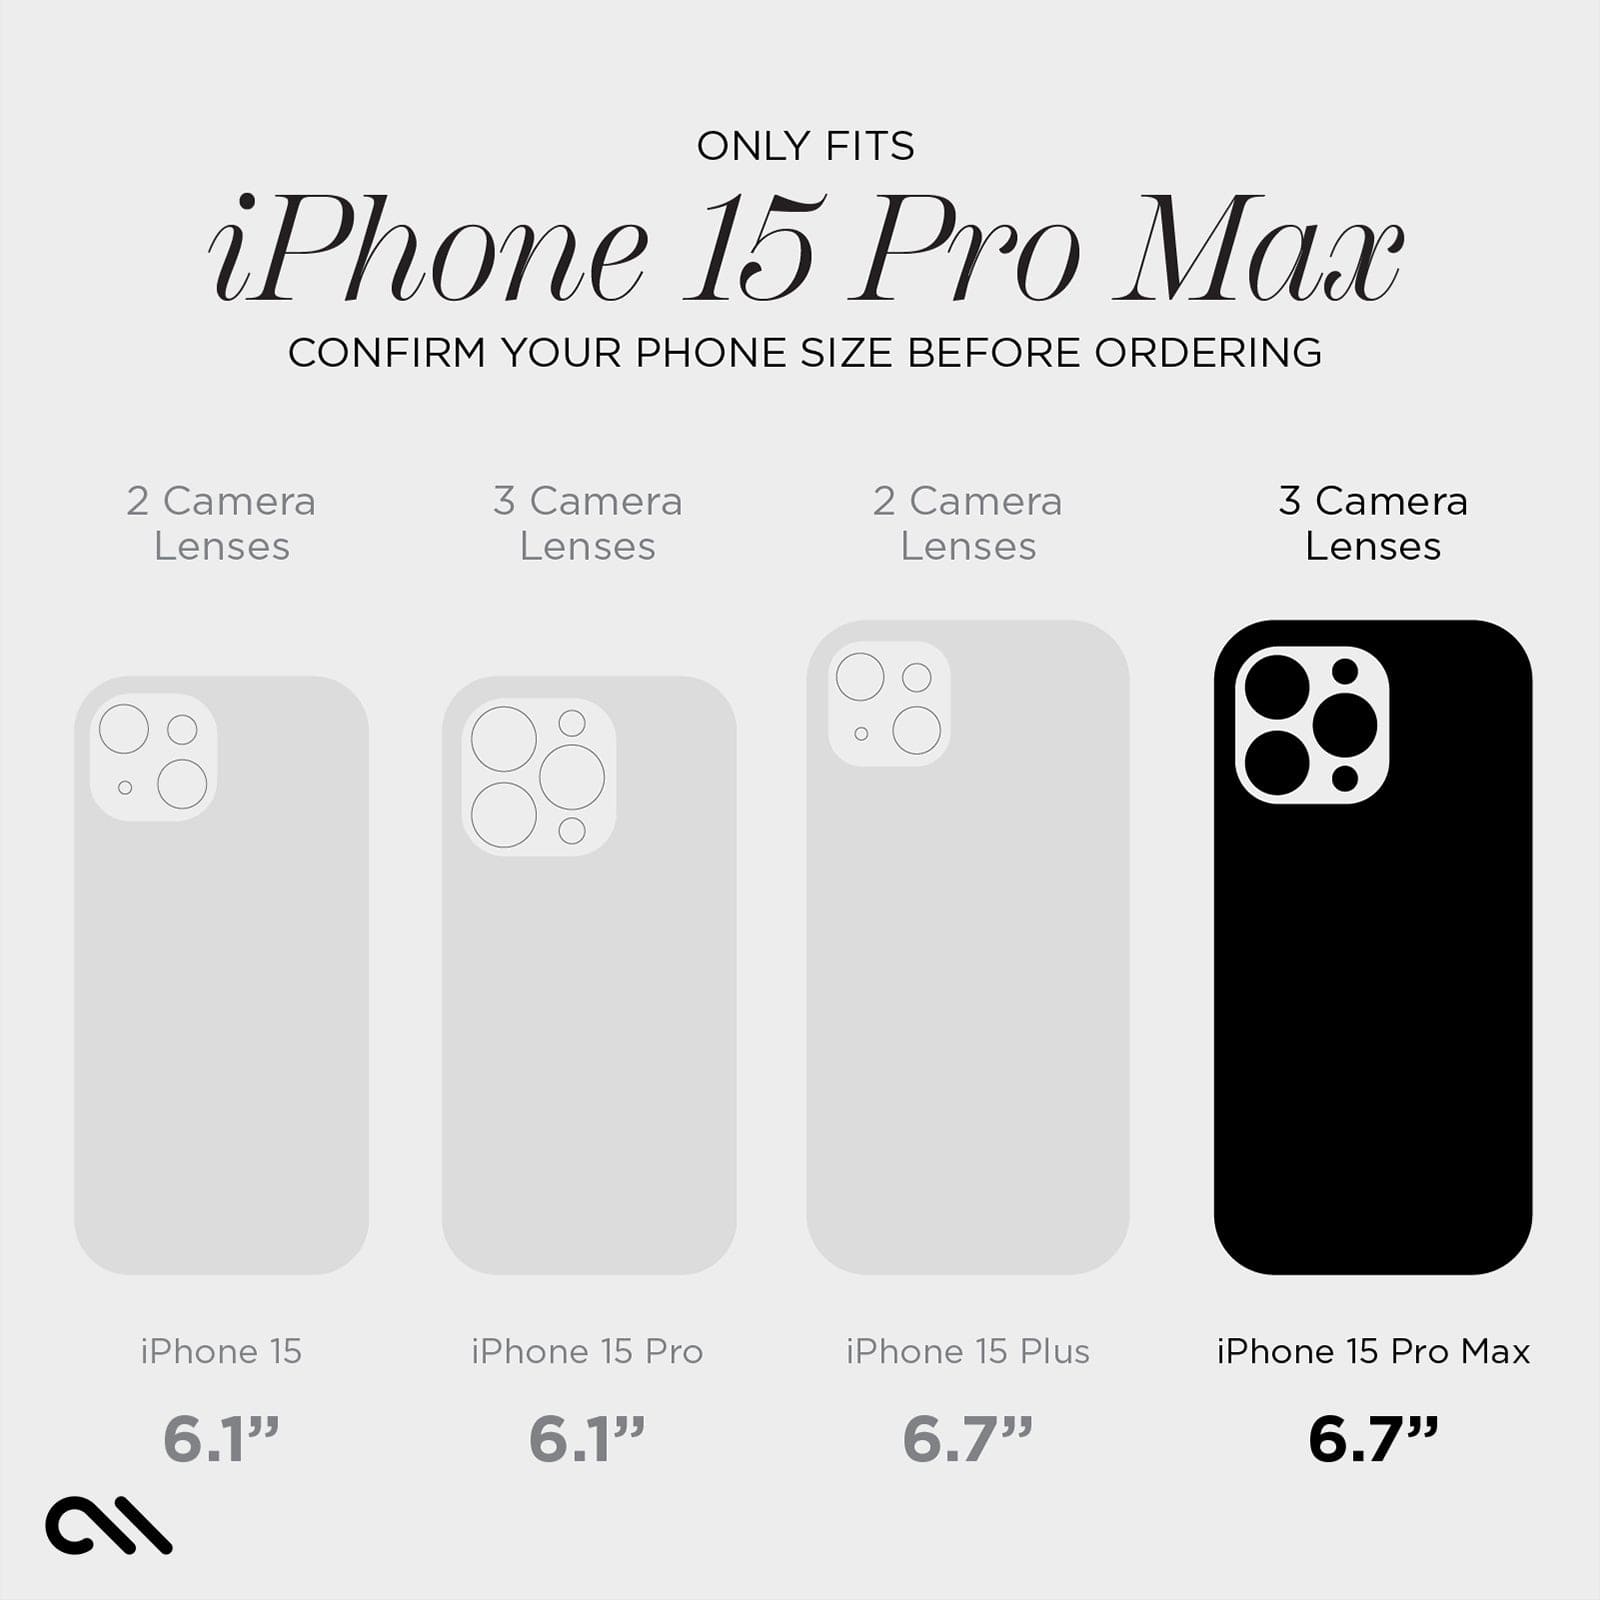 Case-Mate Lens Protector para iPhone 14 Pro/14 Pro Max - Clear - iShop